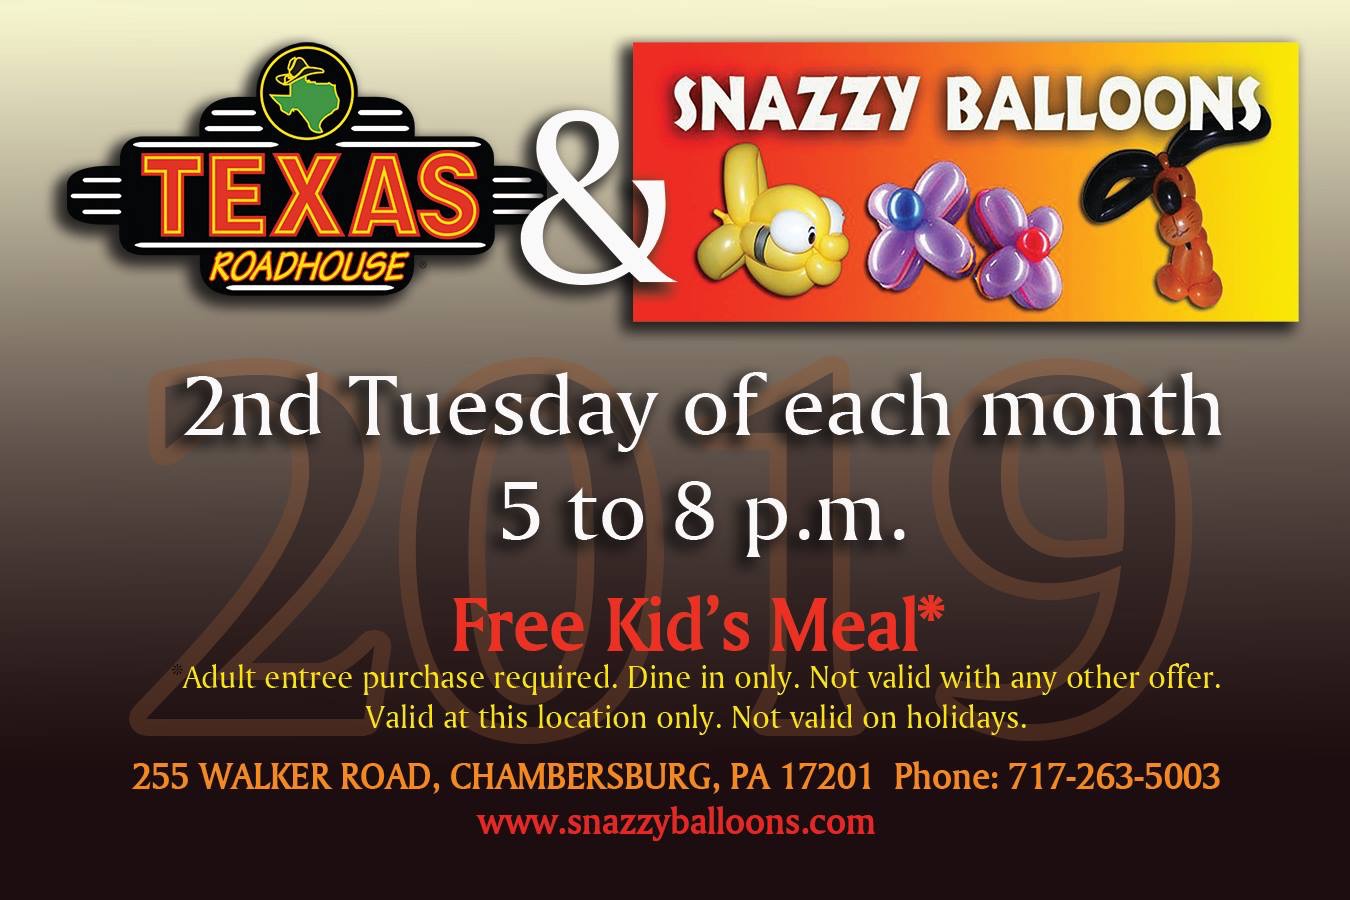 Every Tuesday night is Kid’s Night at Texas Roadhouse in Chambersburg! 